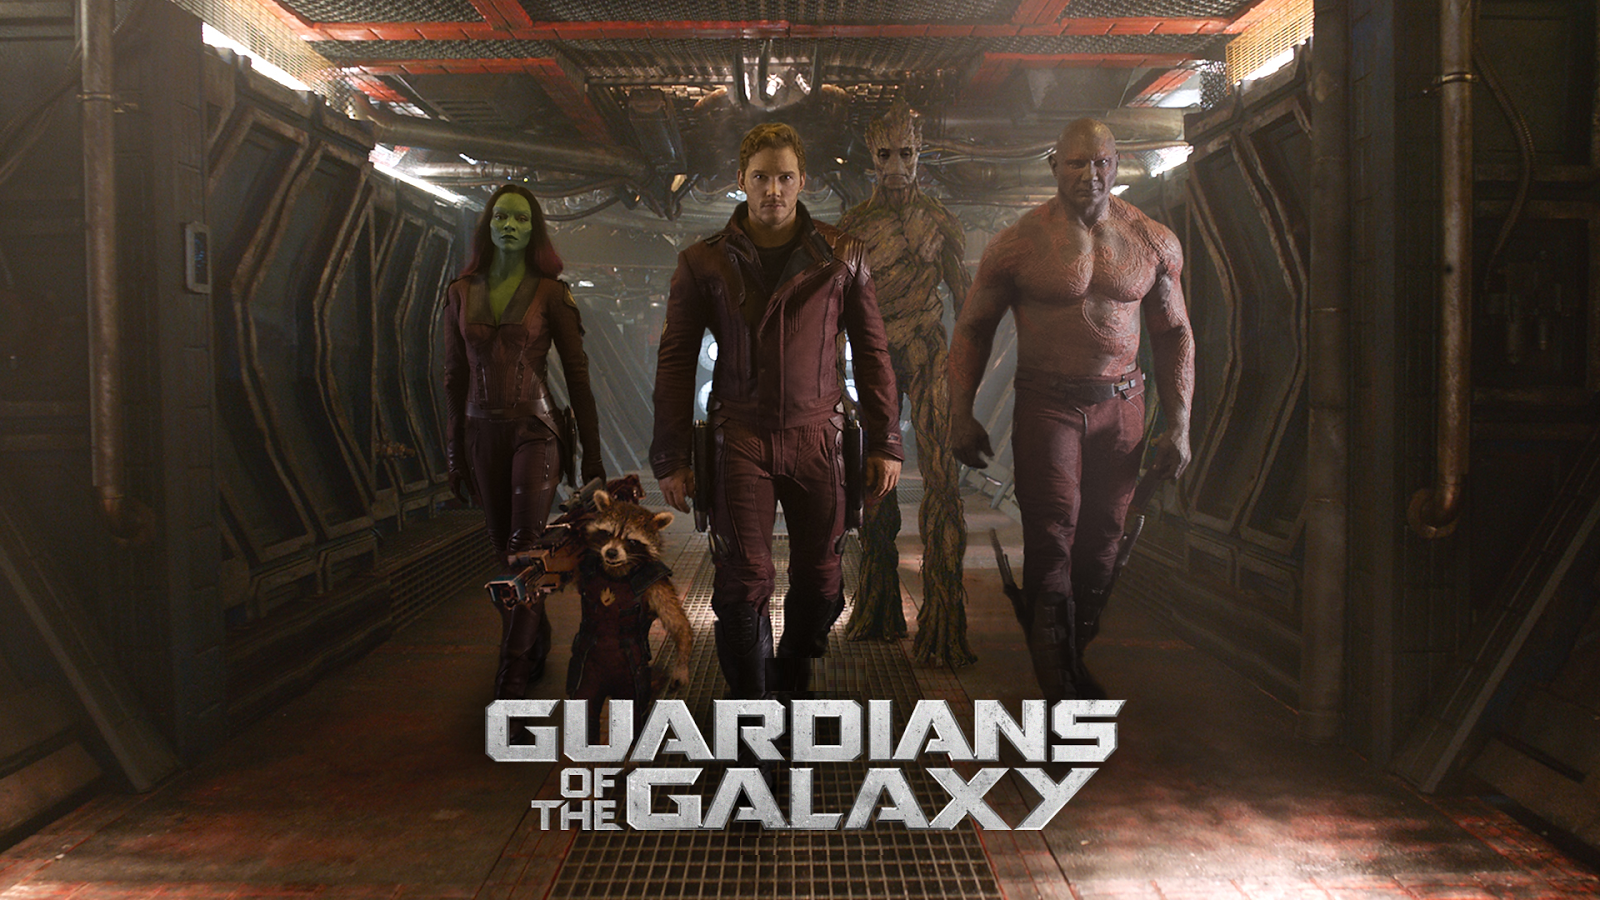 Wallpaper, Guardians of the Galaxy, Star Lord, Gamora, Rocket Raccoon, Groot, Drax the Destroyer, movies, Marvel Cinematic Universe 1600x900